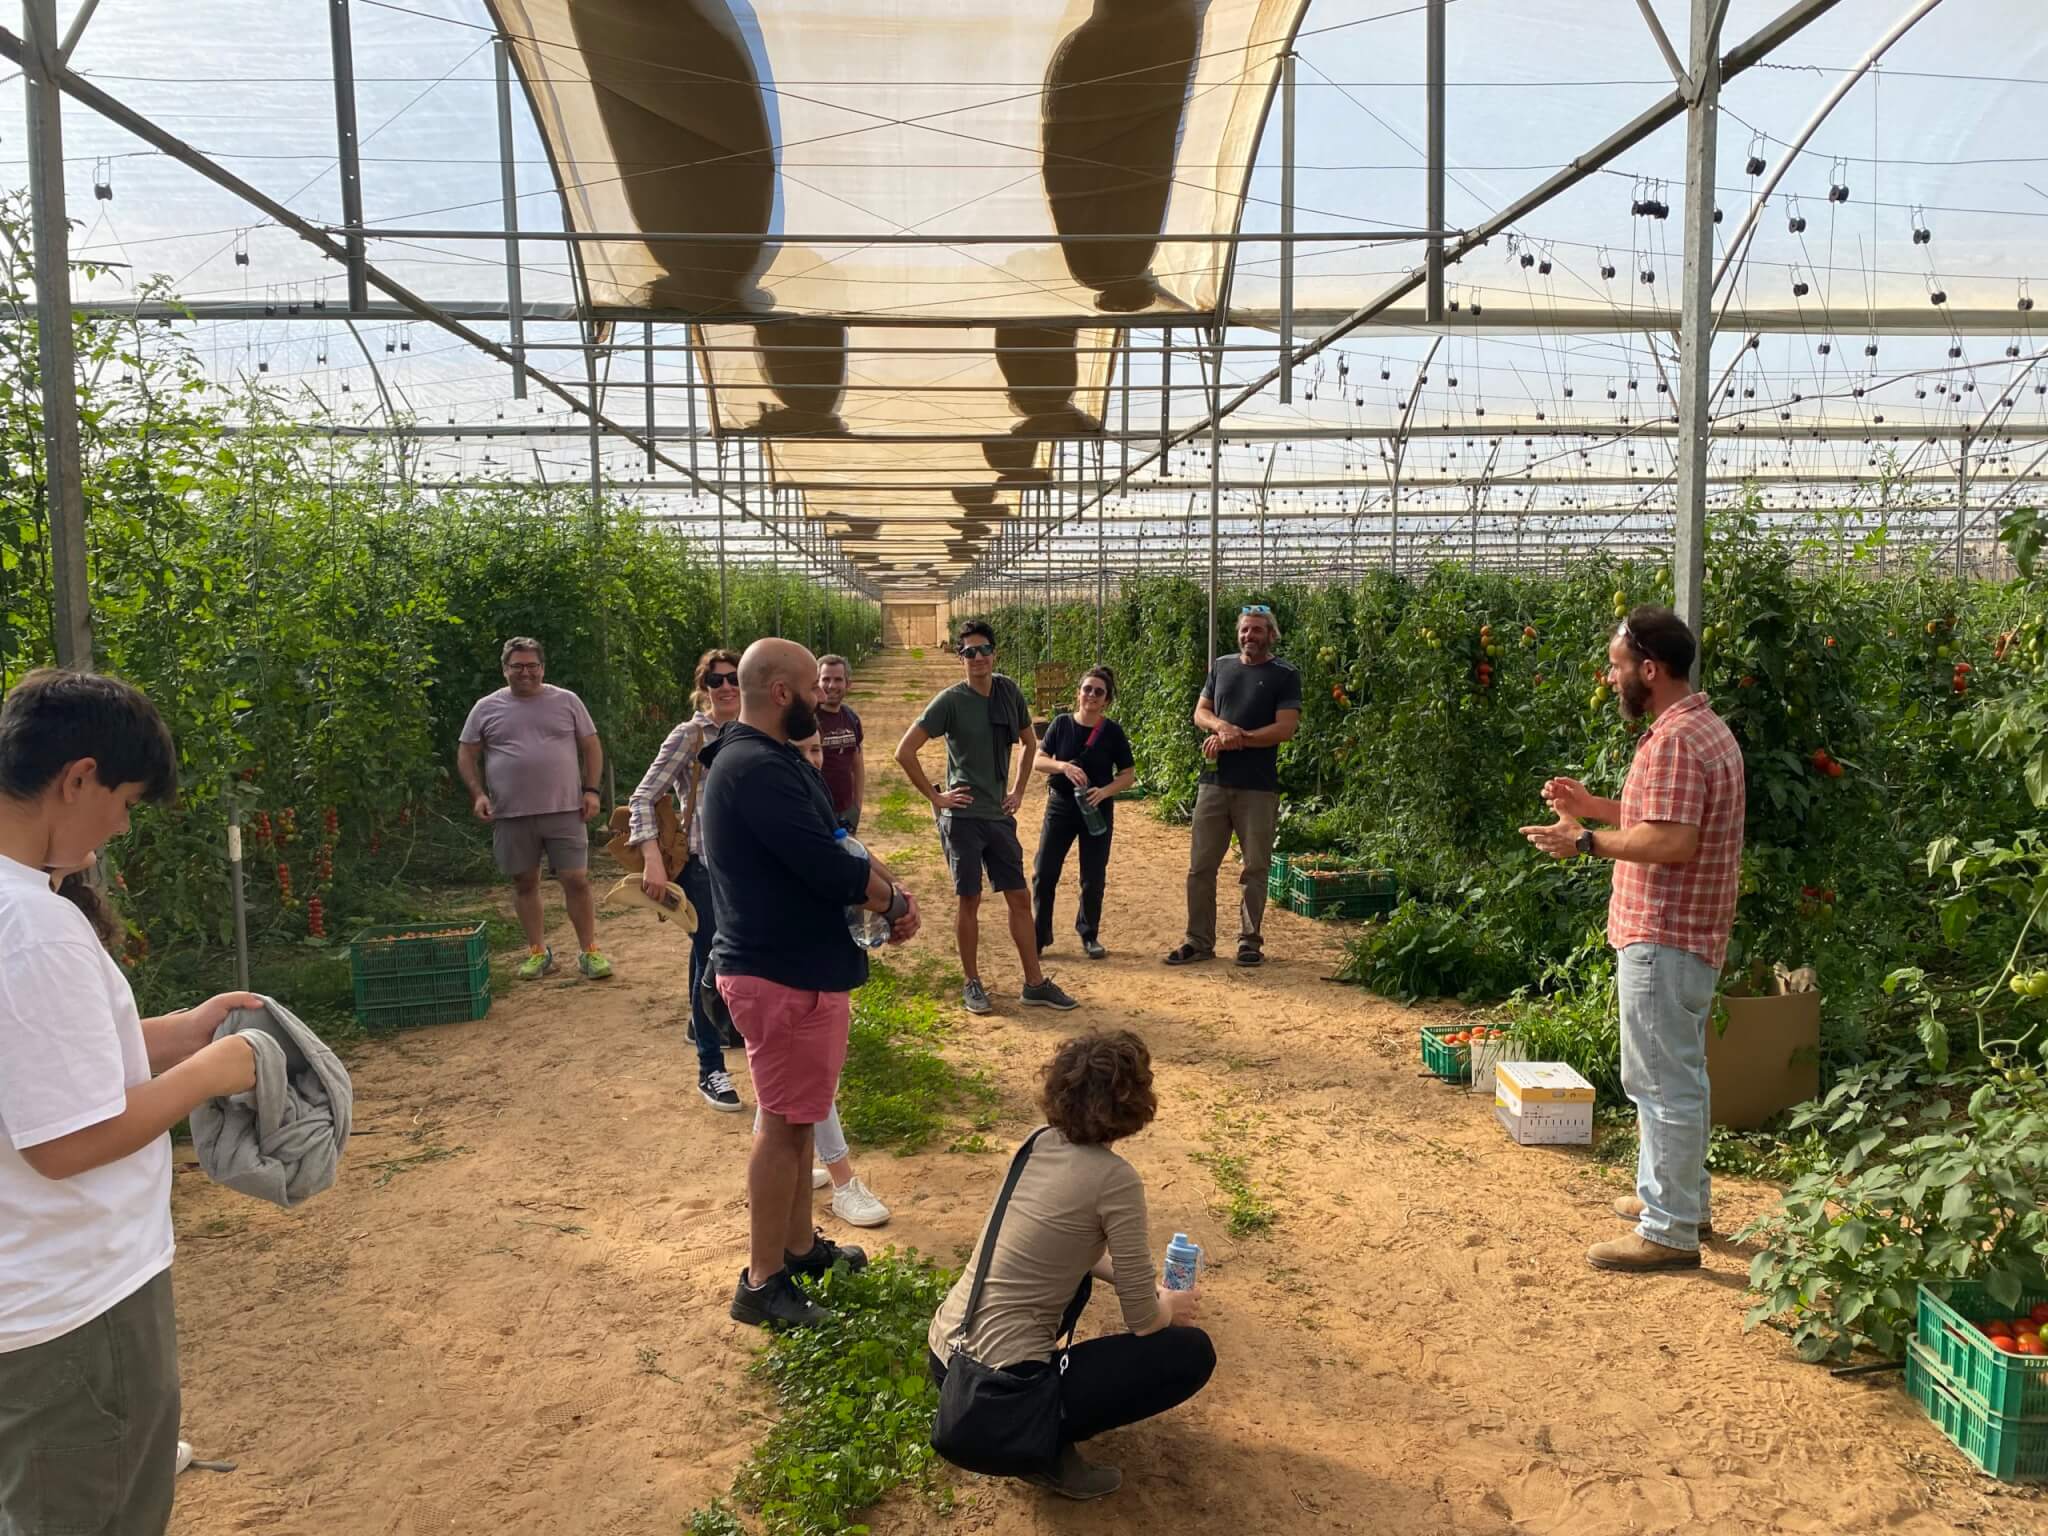 Green house in Ramat Hanegev as seen during Colorado cohort visit to Israel in 2022